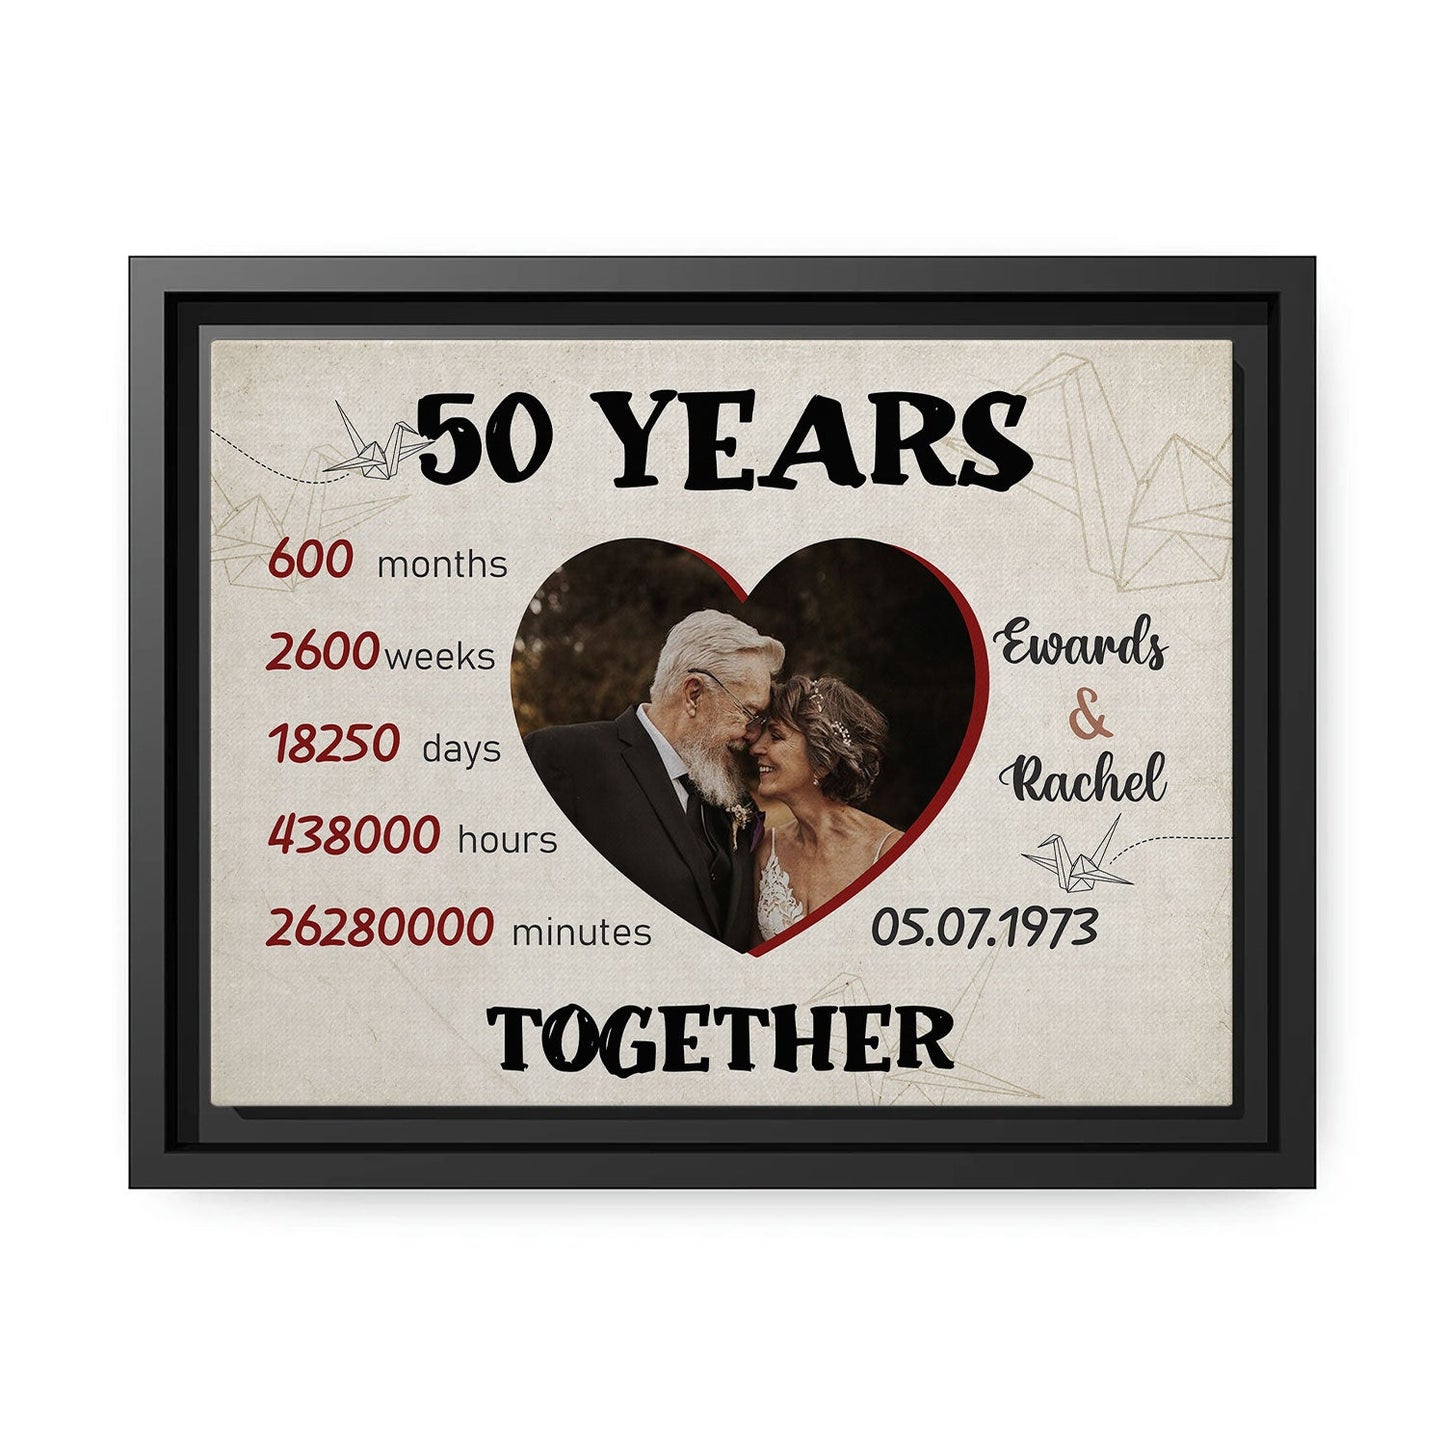 50 Years Together - Personalized 50 Year Anniversary gift for Husband or Wife - Custom Canvas - MyMindfulGifts